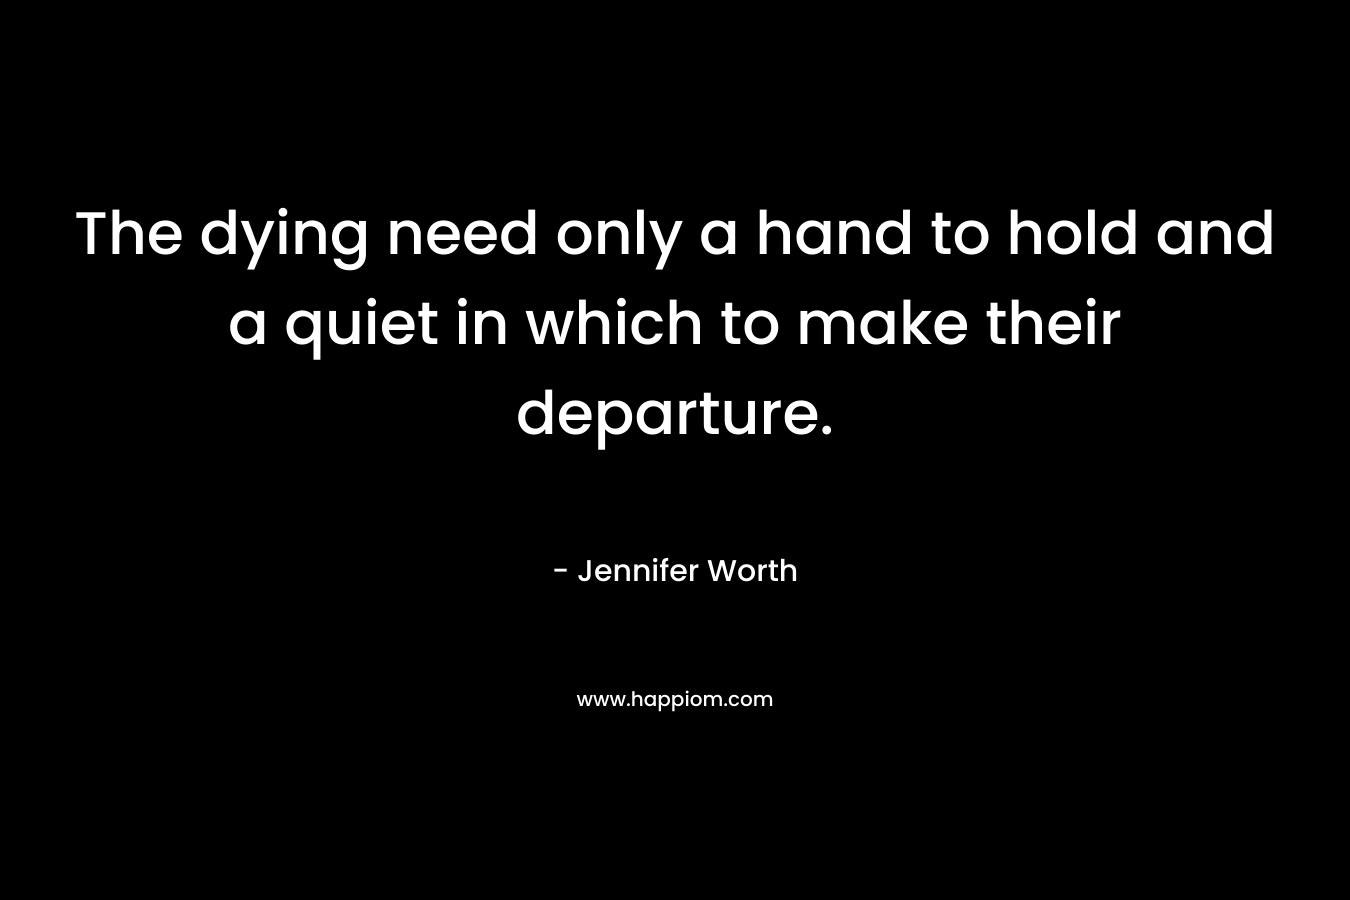 The dying need only a hand to hold and a quiet in which to make their departure. – Jennifer Worth